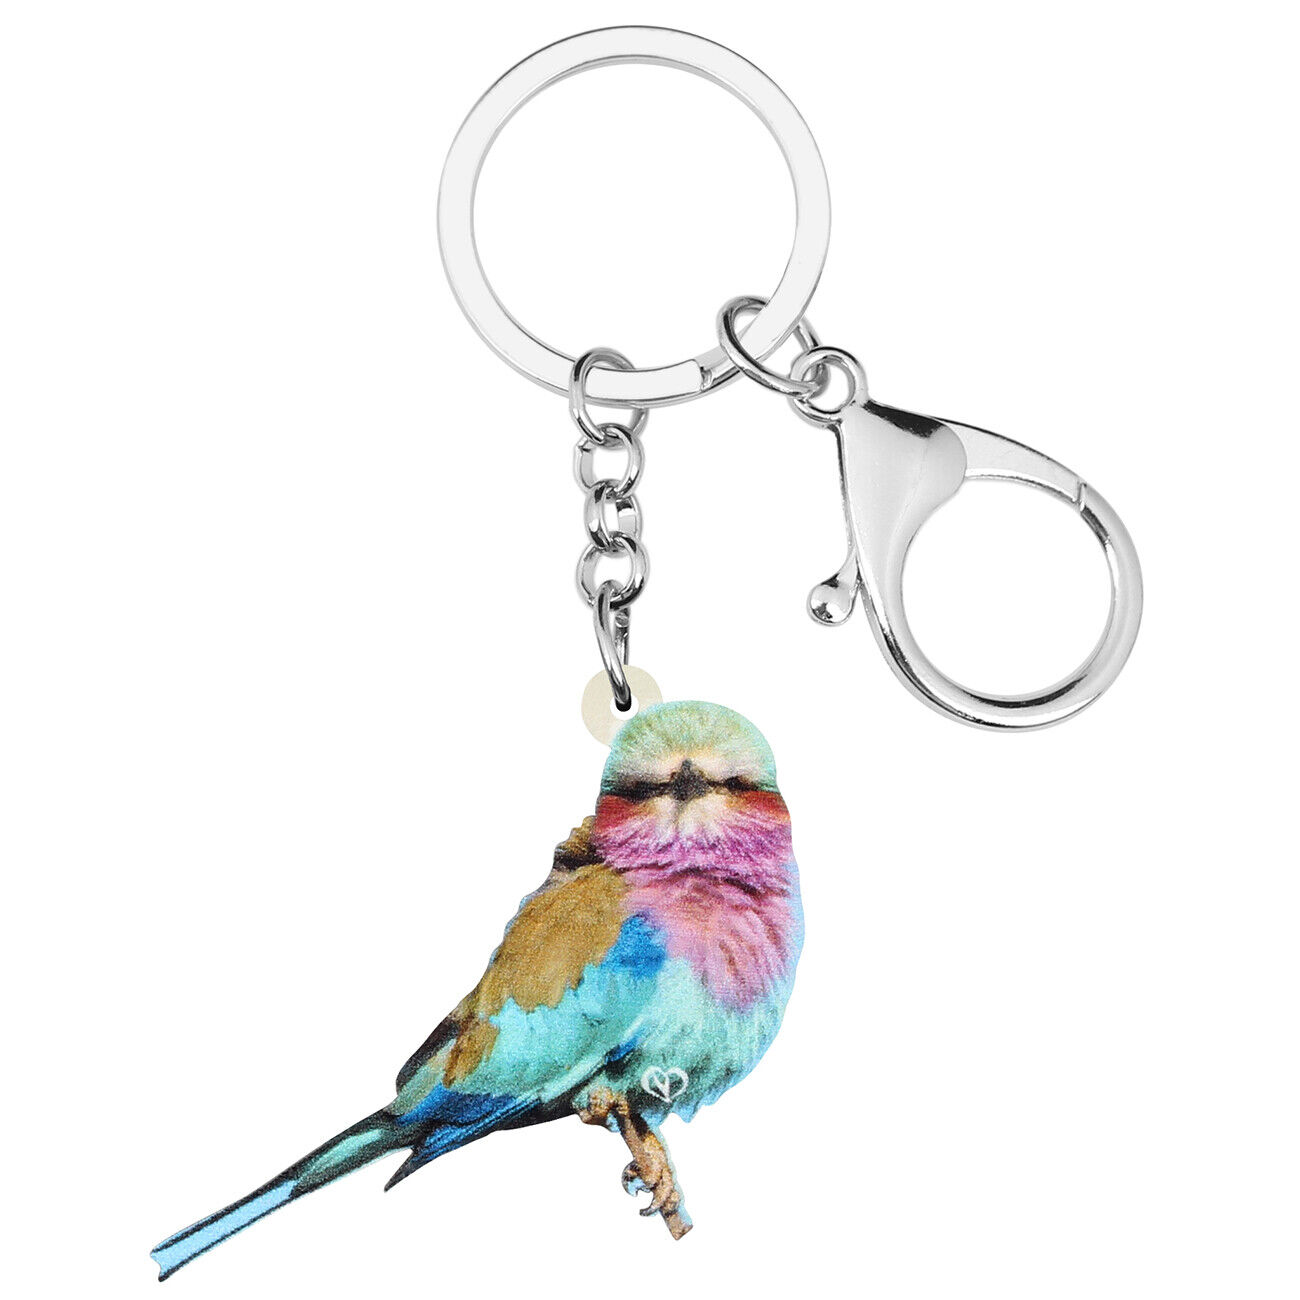 Acrylic Lilac-breasted Roller Bird Keychains Purse Car Key Ring Bag Charms Gifts